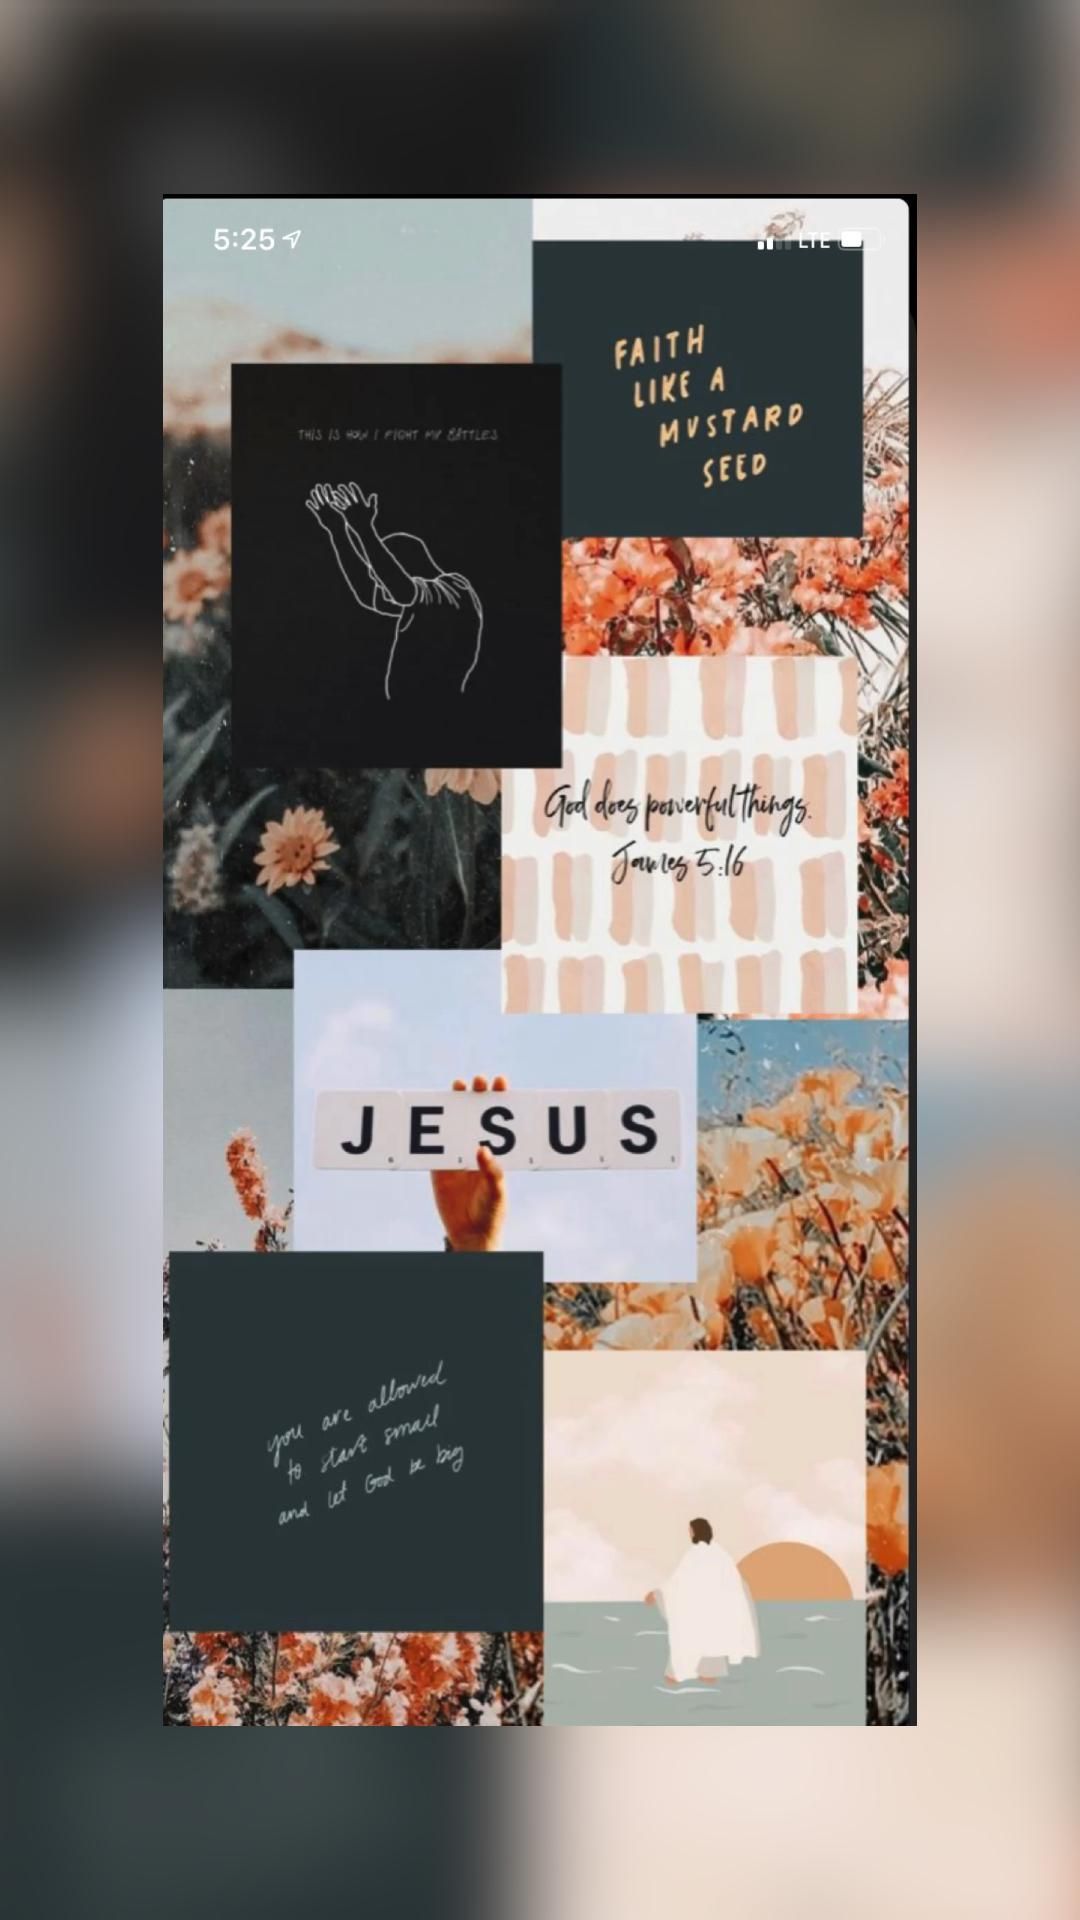 A collage of jesus and other religious images - Jesus